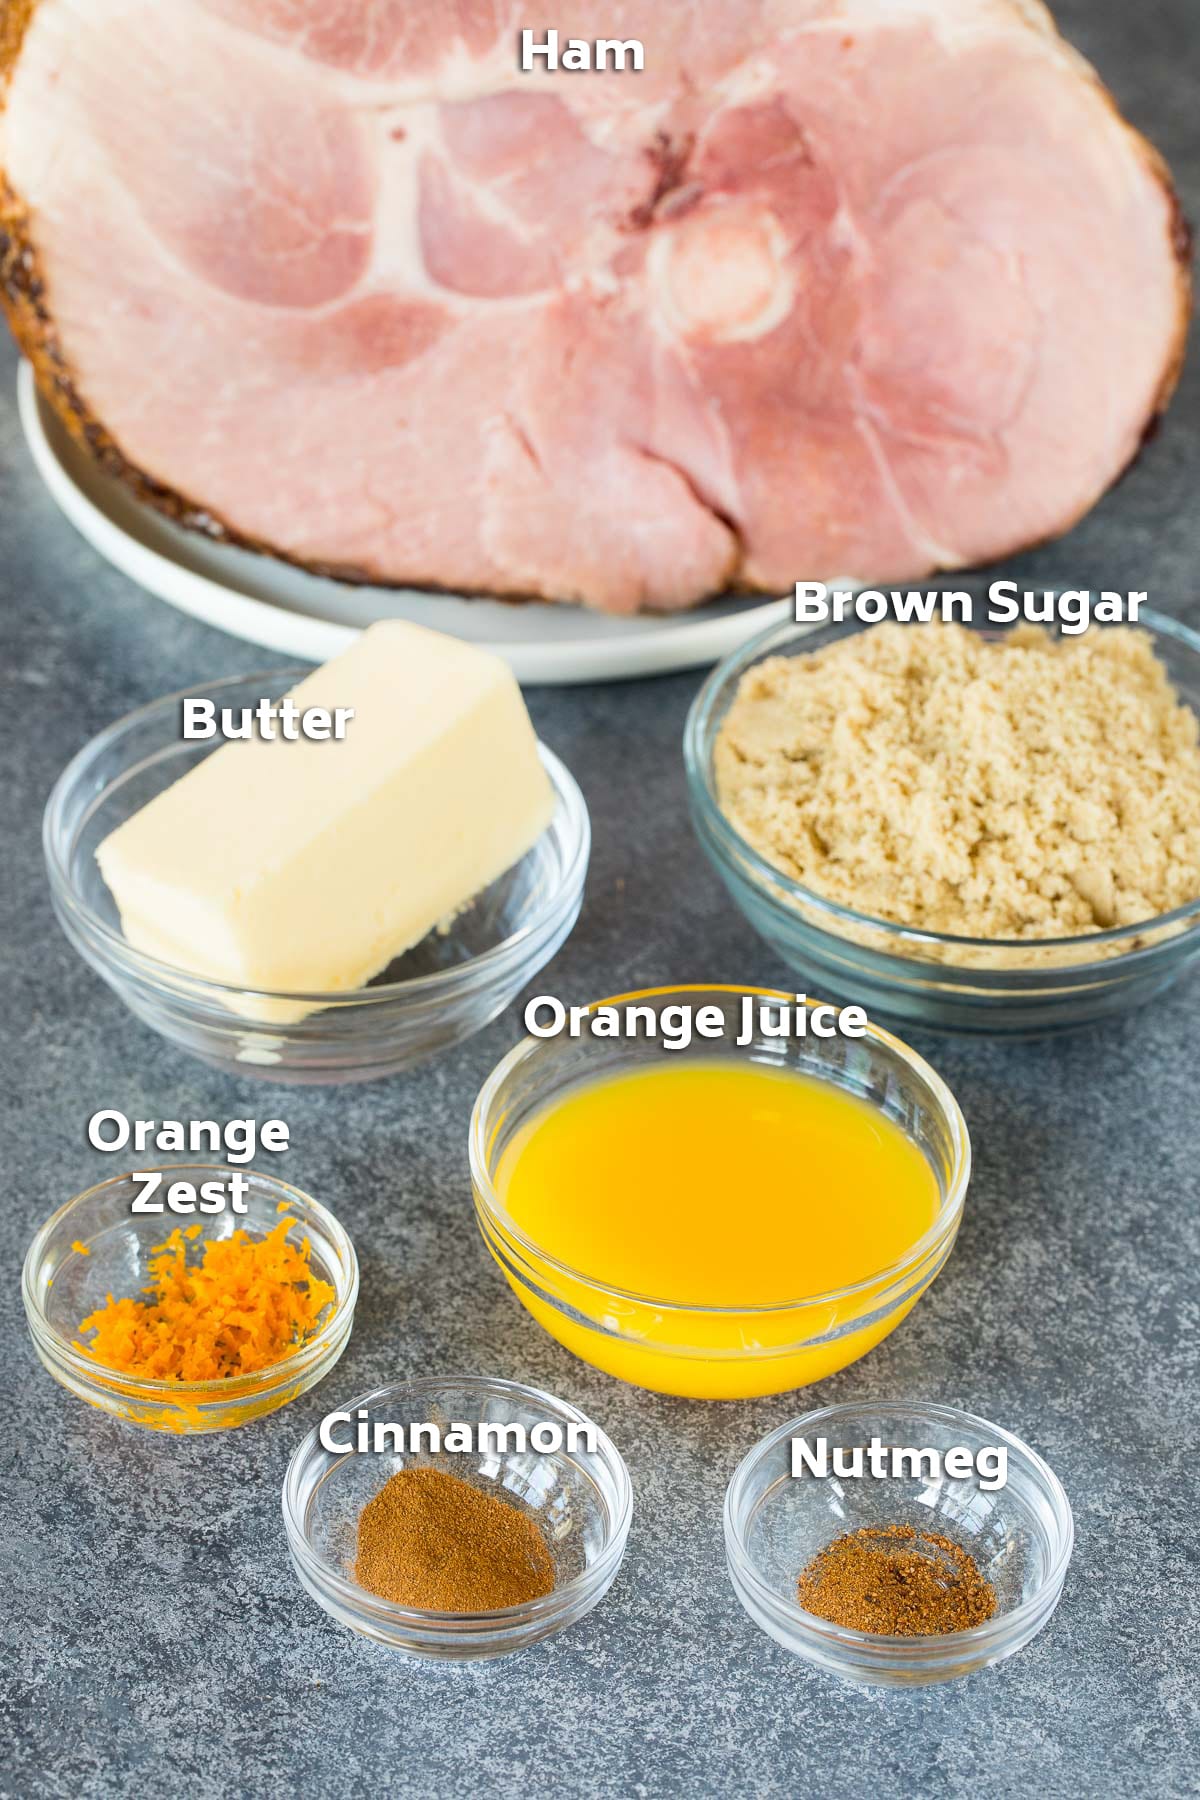 Ingredients including orange juice, spices, brown sugar and butter.